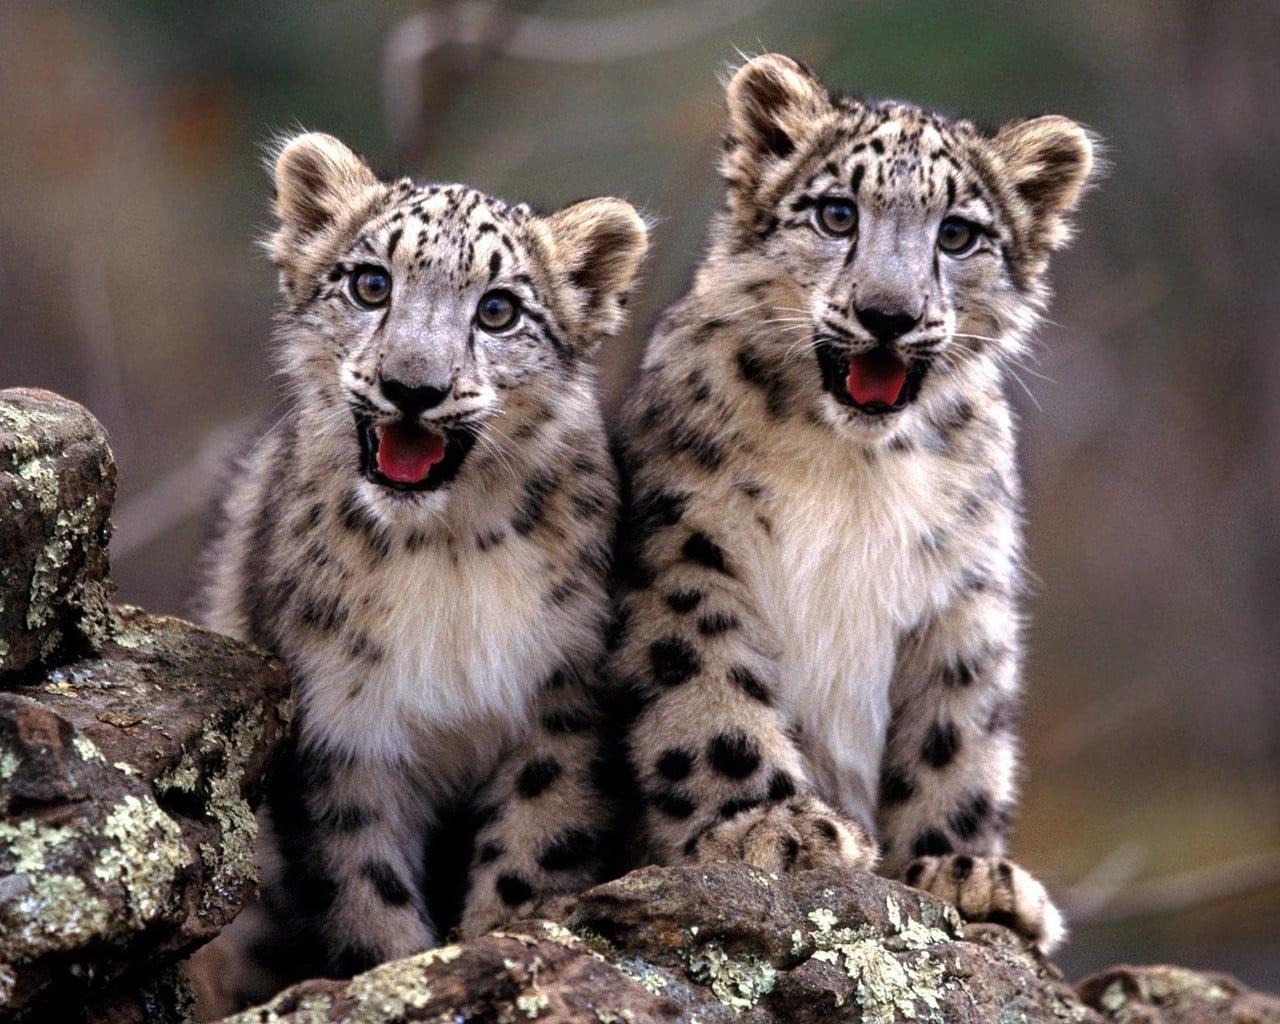 Two leopards, baby animals, snow leopards, animals, leopard animal